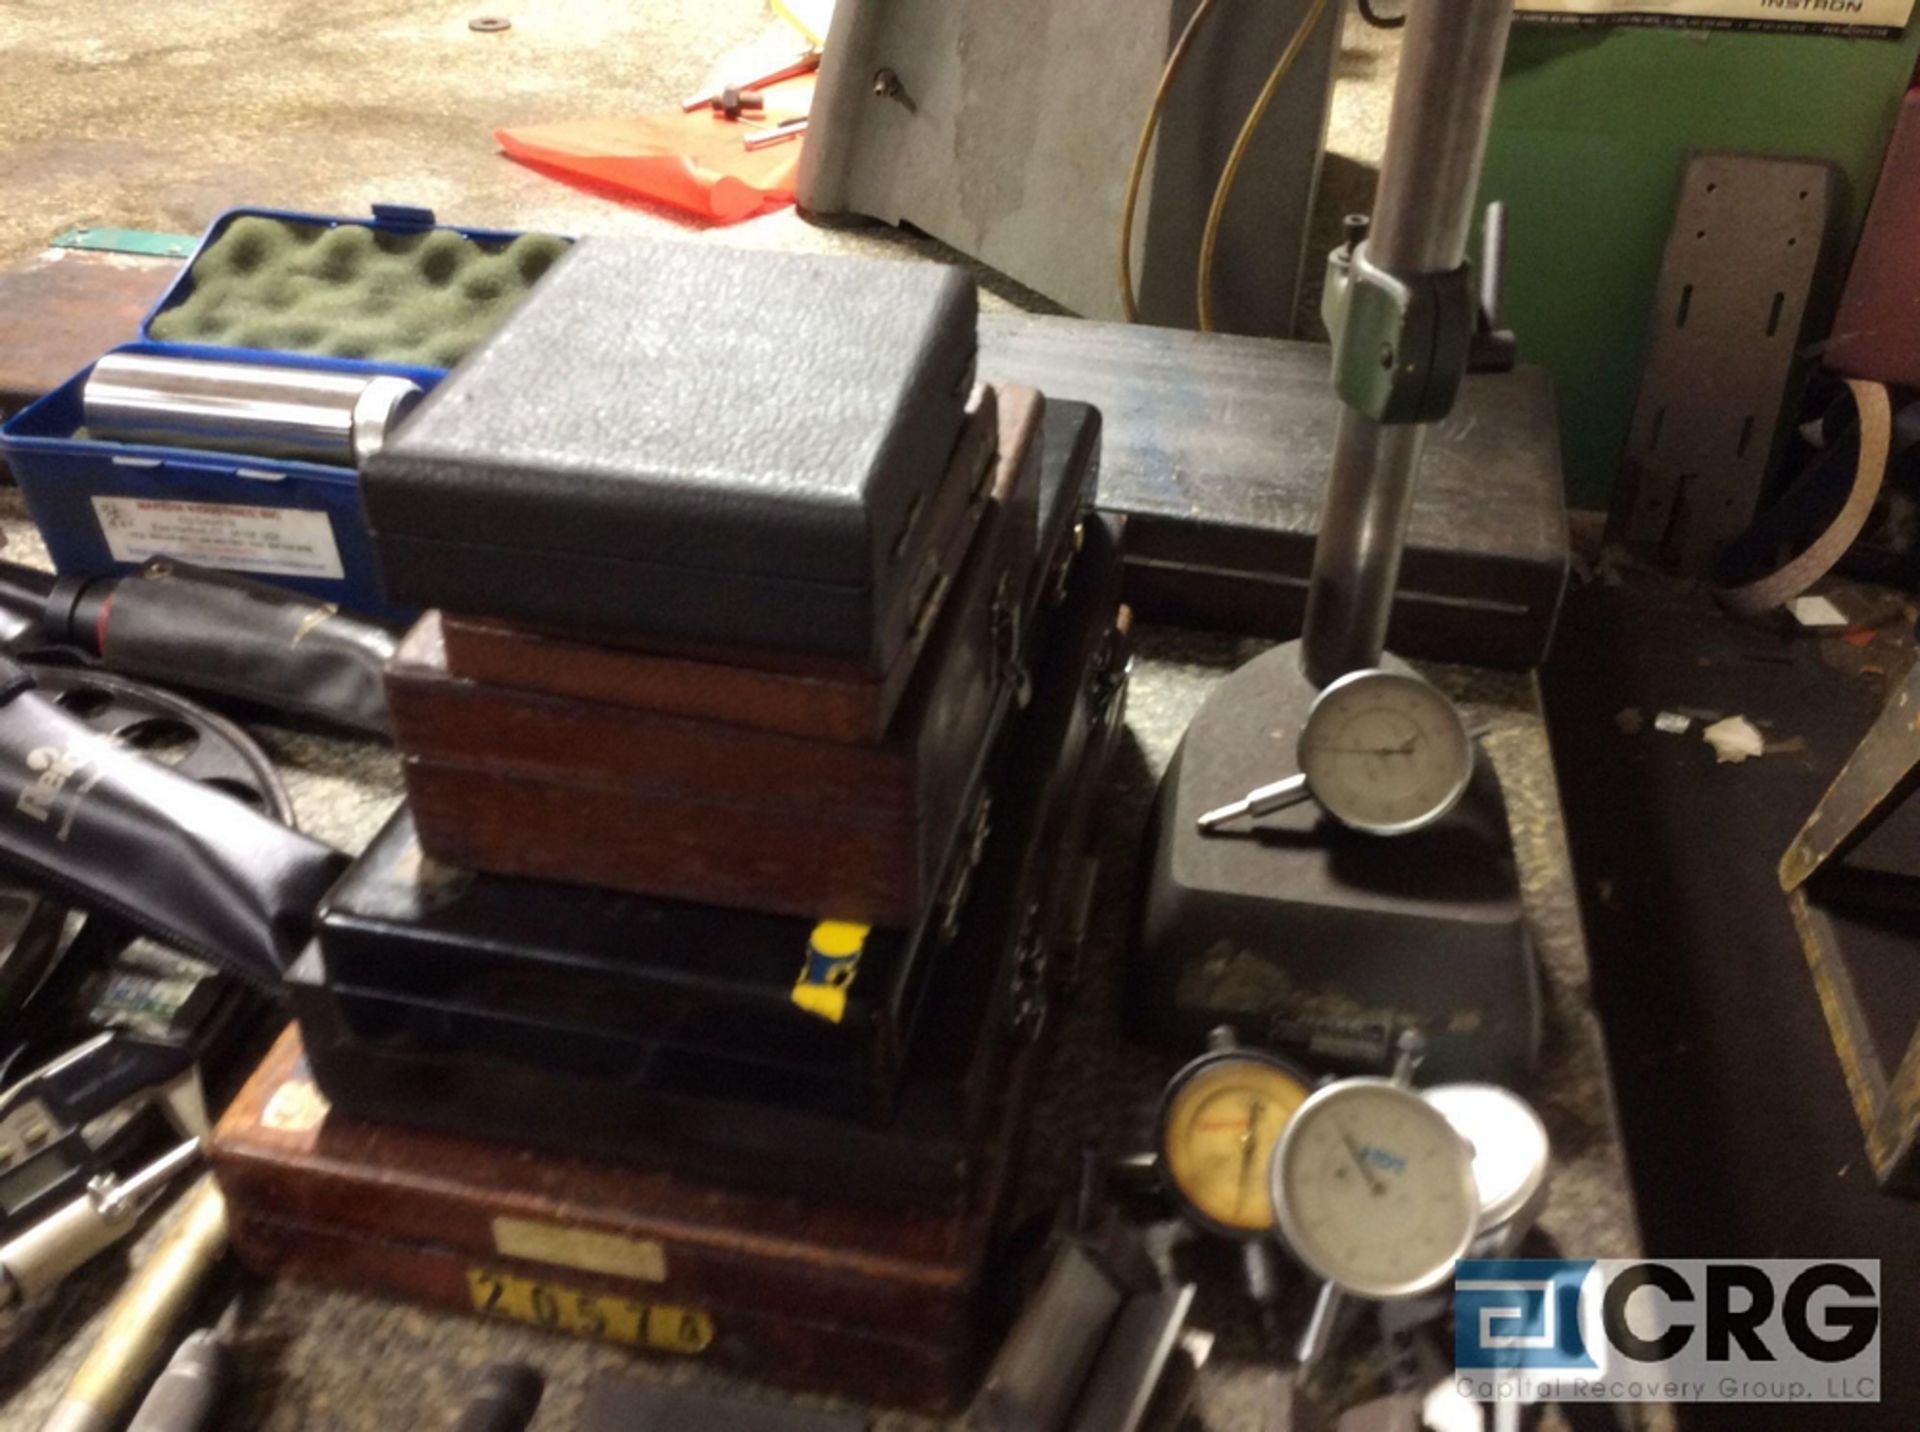 Lot of assorted Inspection, measuring and testing devices etc. - Image 10 of 10